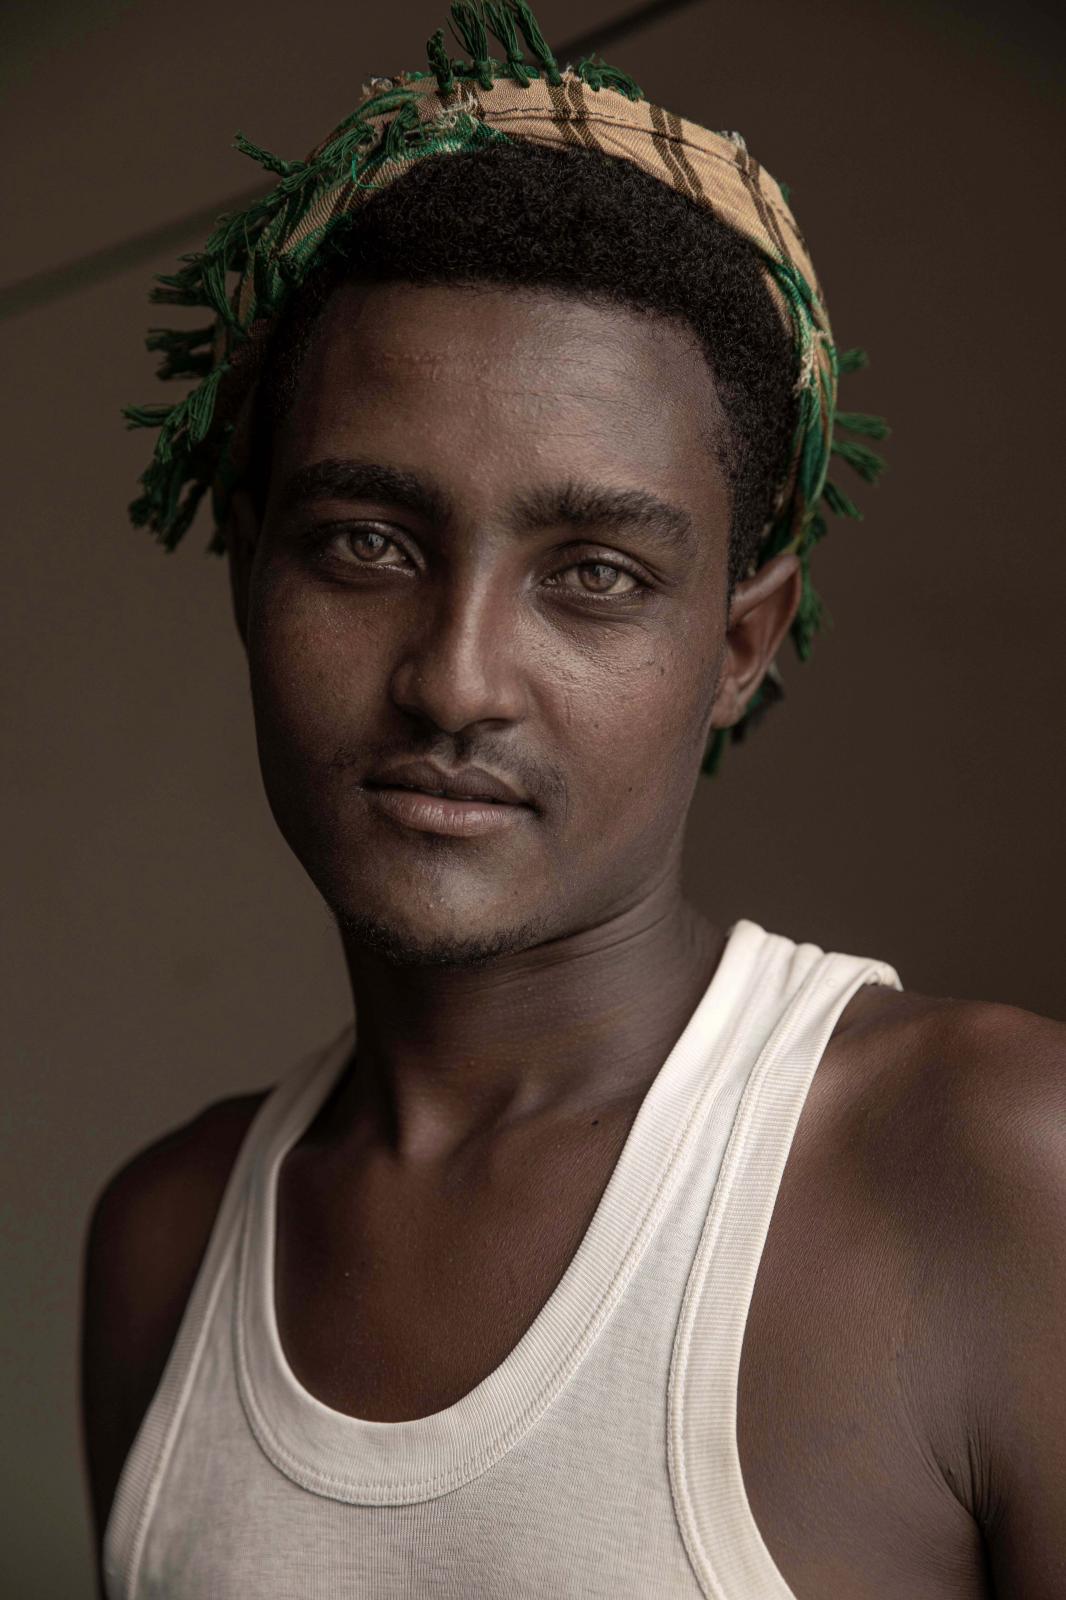  Hussein Asfar, 20, a victim of abuse from smugglers when he landed in Yemen. 